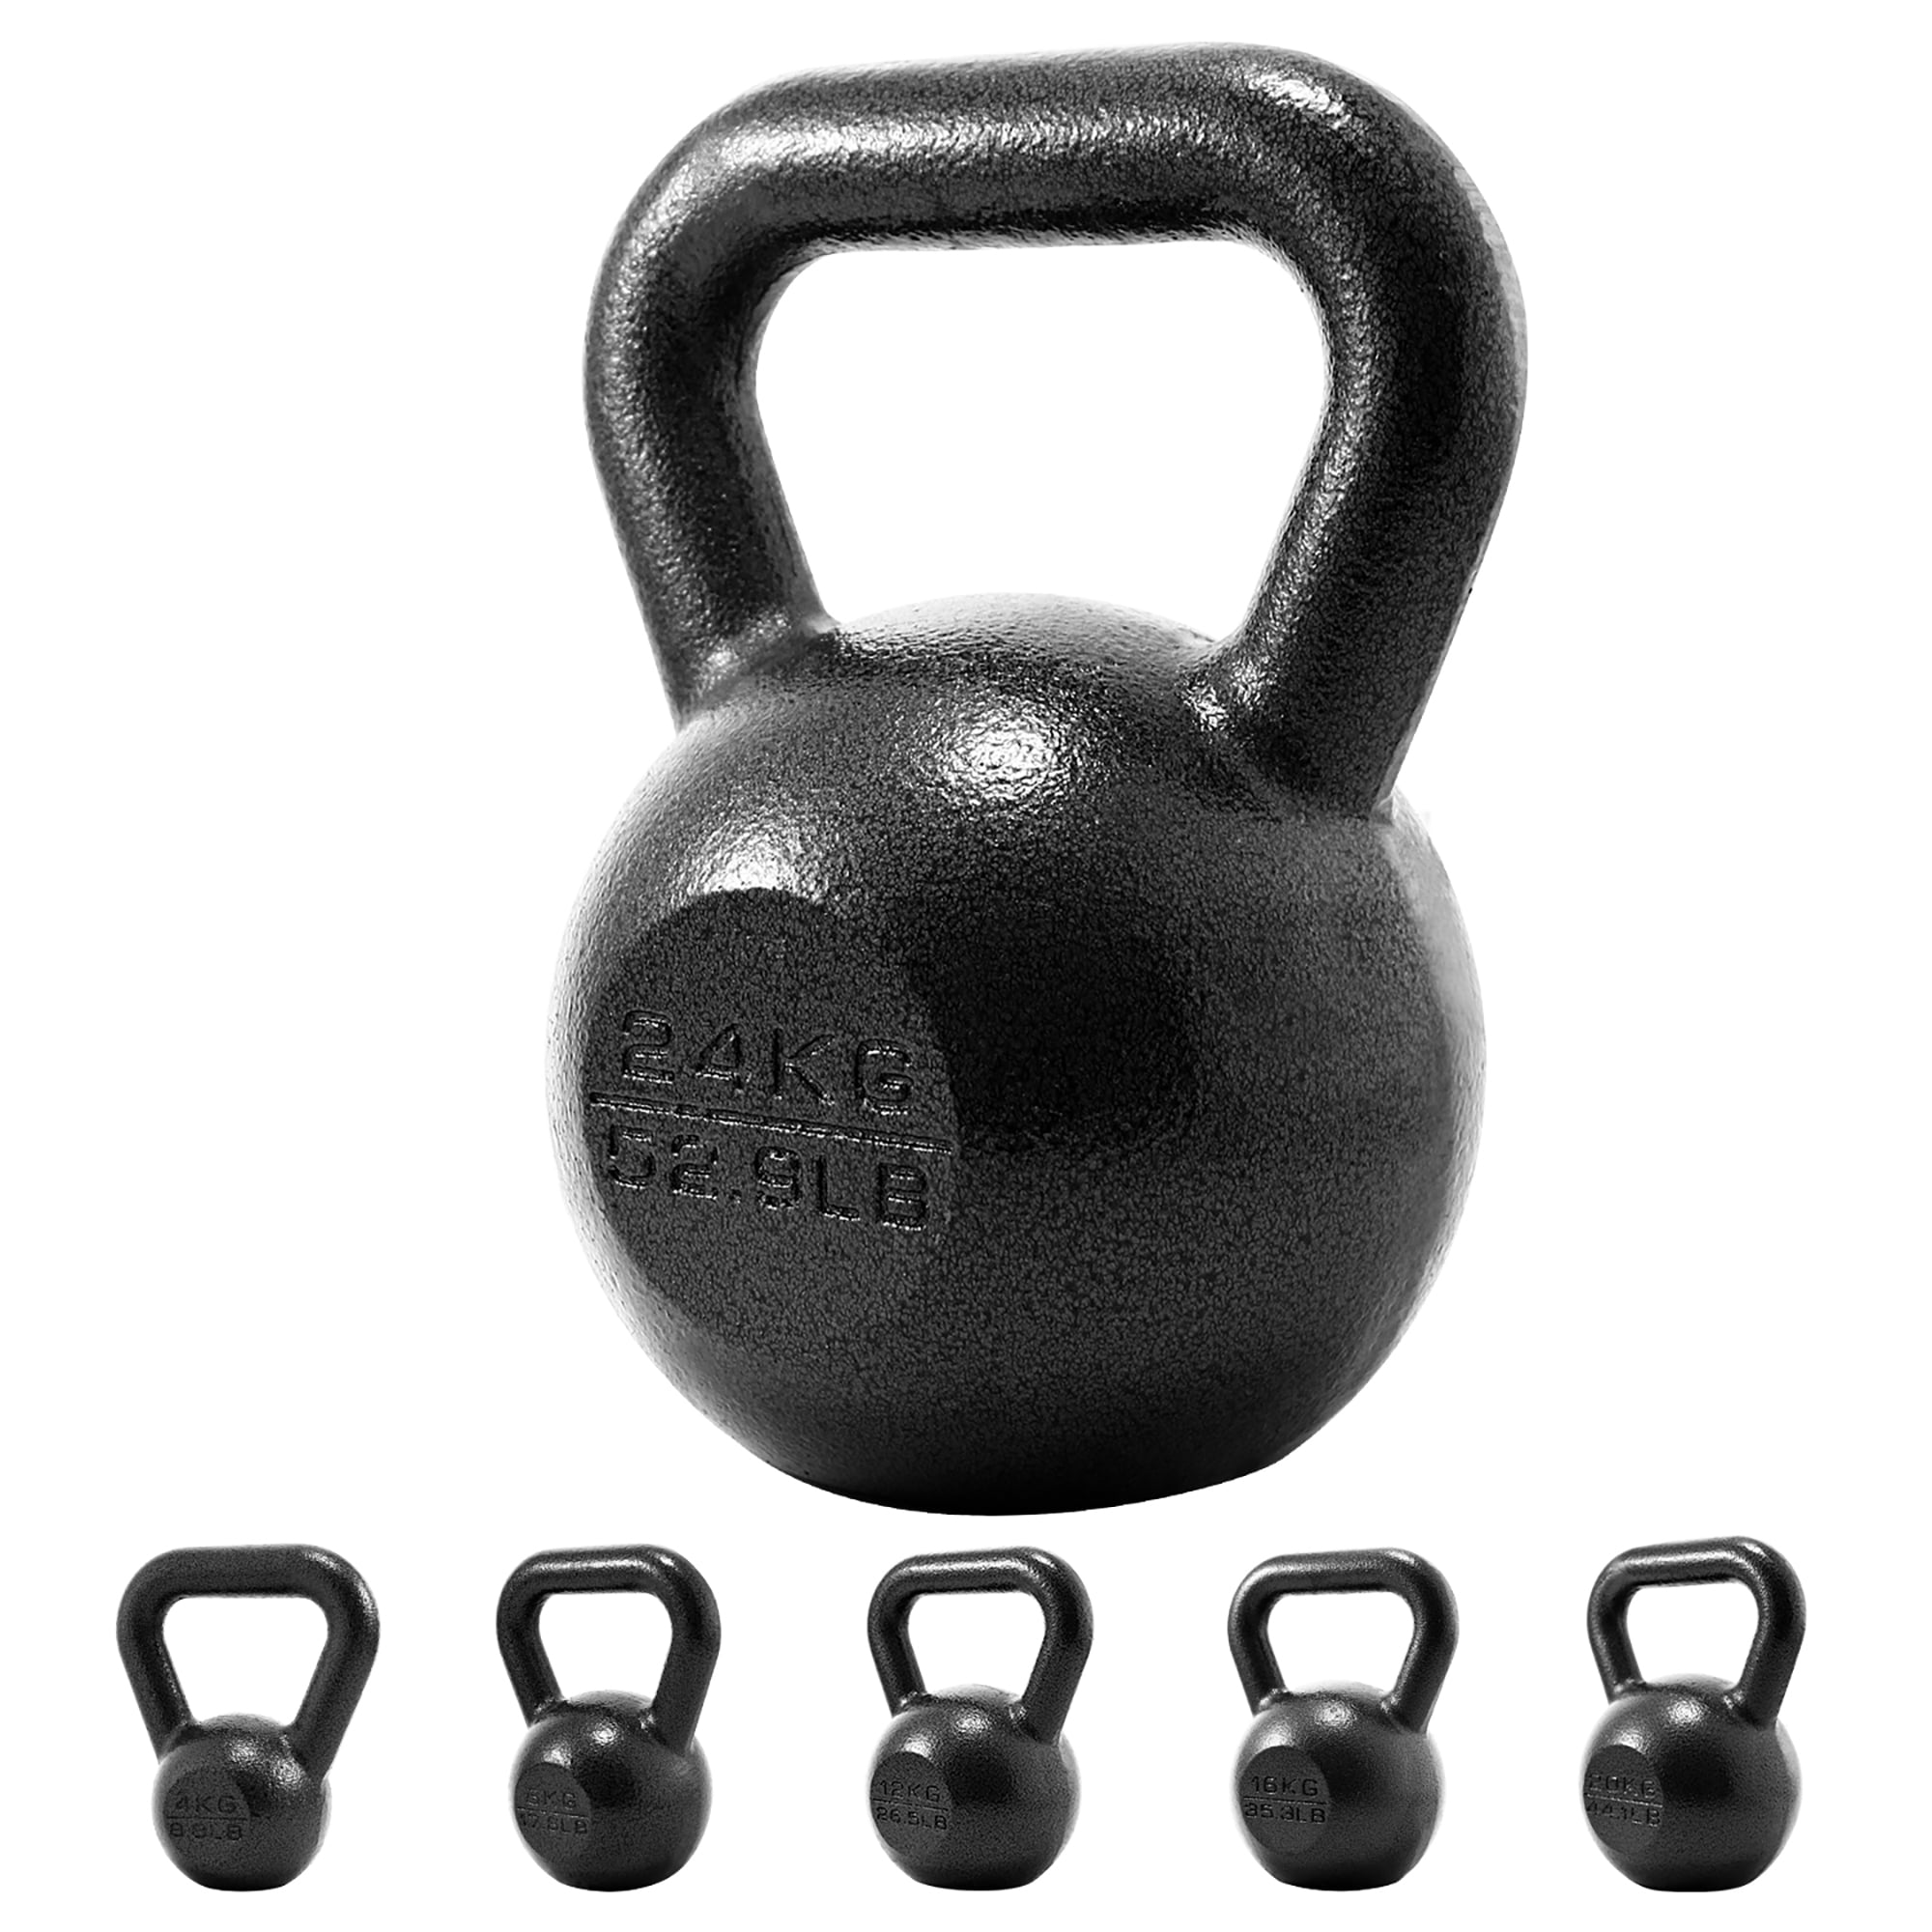 Cast Iron 24kg KETTLEBELL for Weight Lifting and WorkoutsHOME GYM EQUIPMENT 